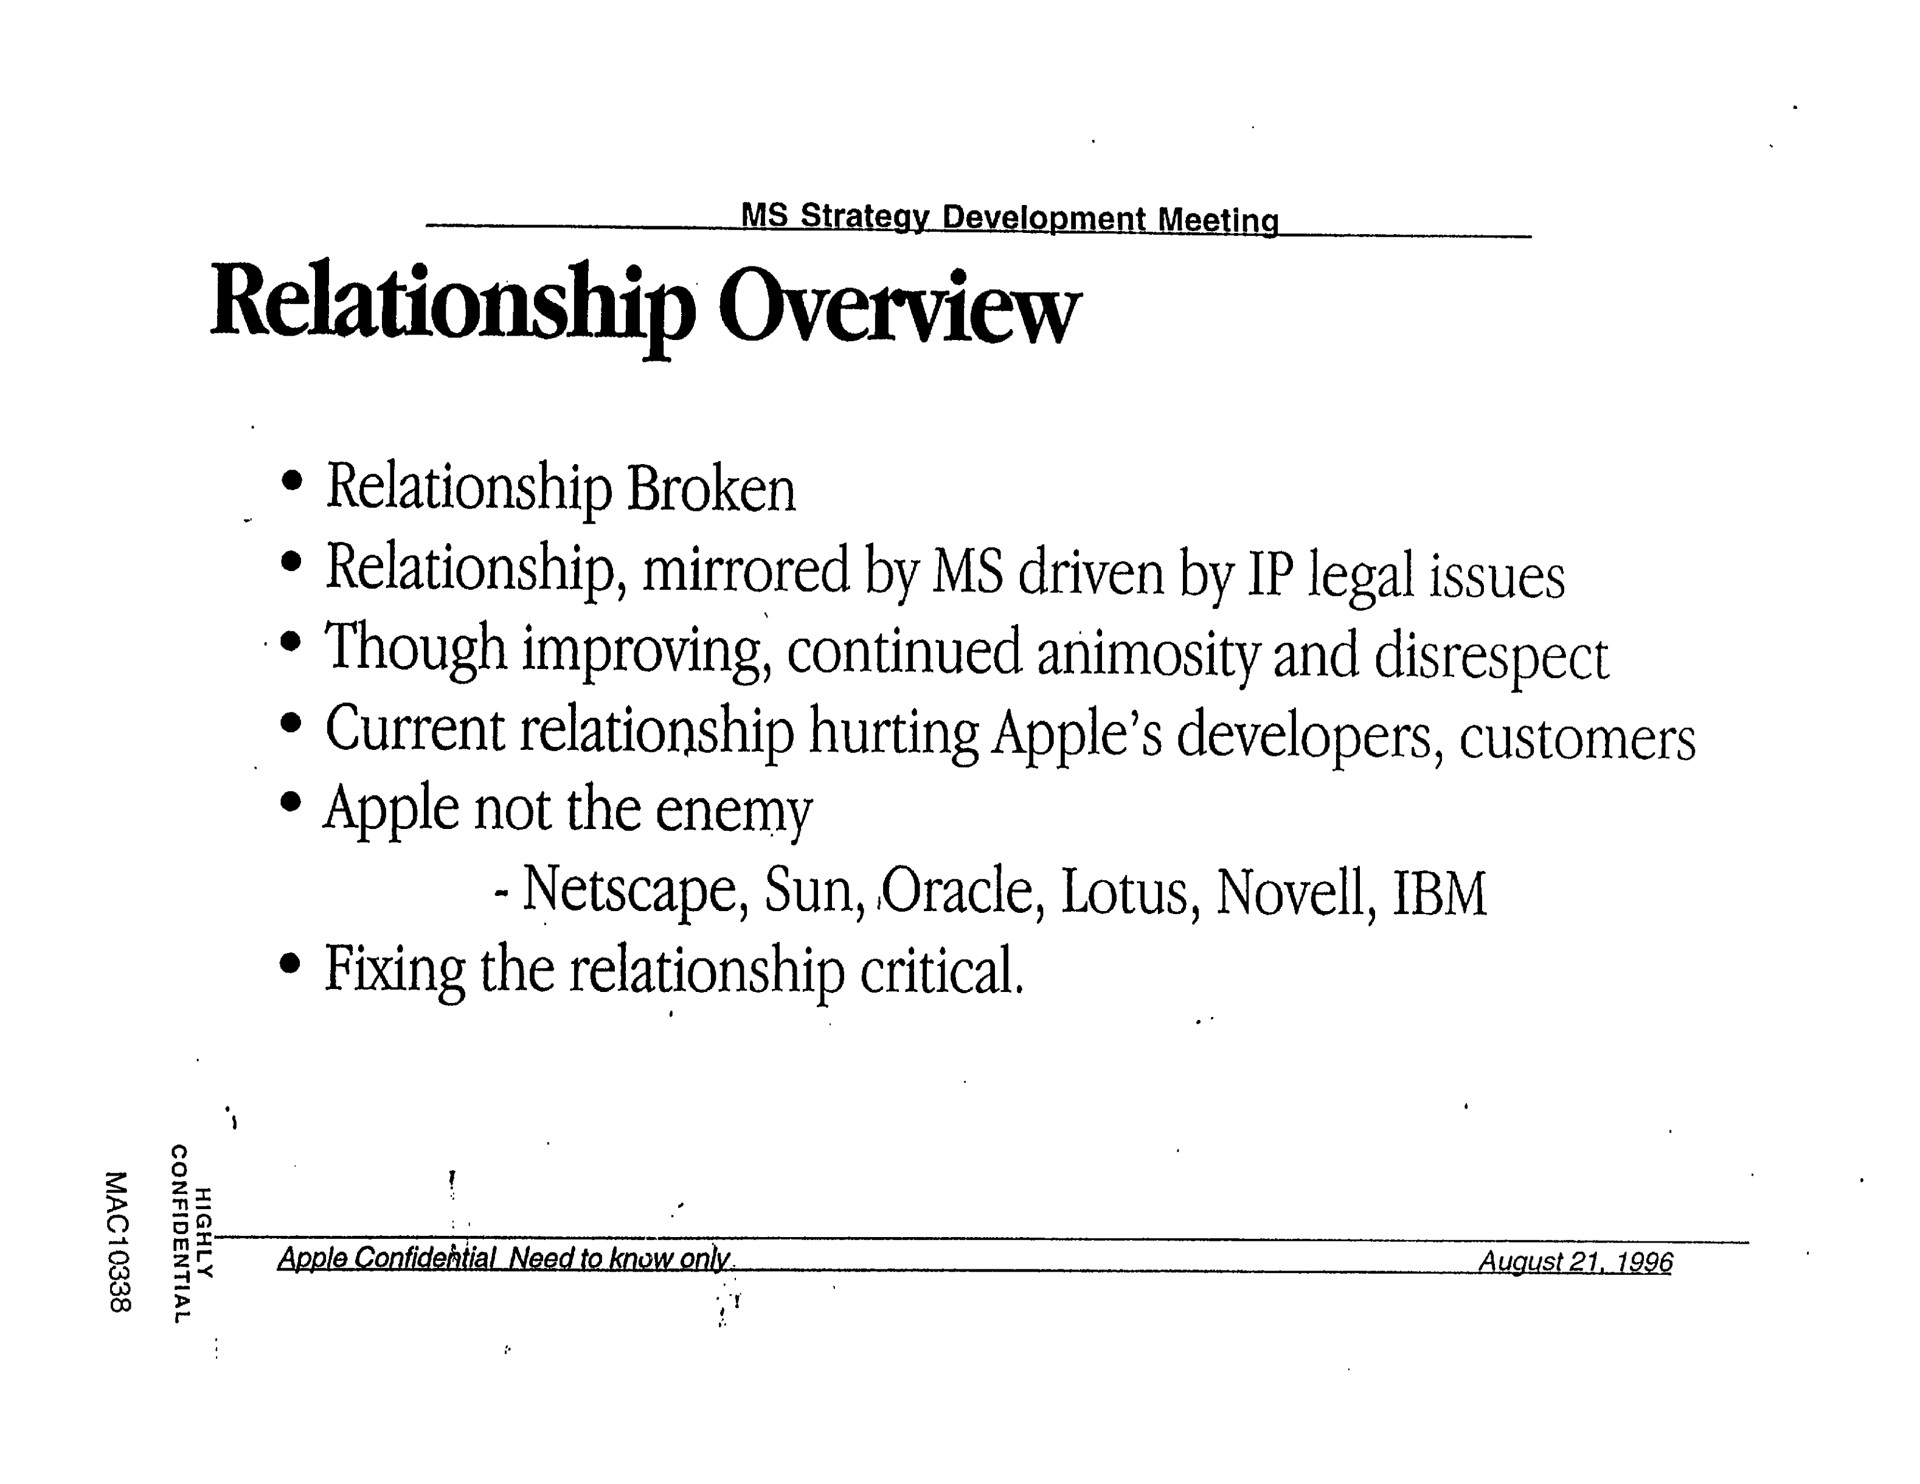 relationship overview relationship broken relationship mirrored by driven by legal issues though improving continued animosity and disrespect current relationship hurting apple developers customers apple not the enemy sun oracle lotus fixing the relationship critical | Apple